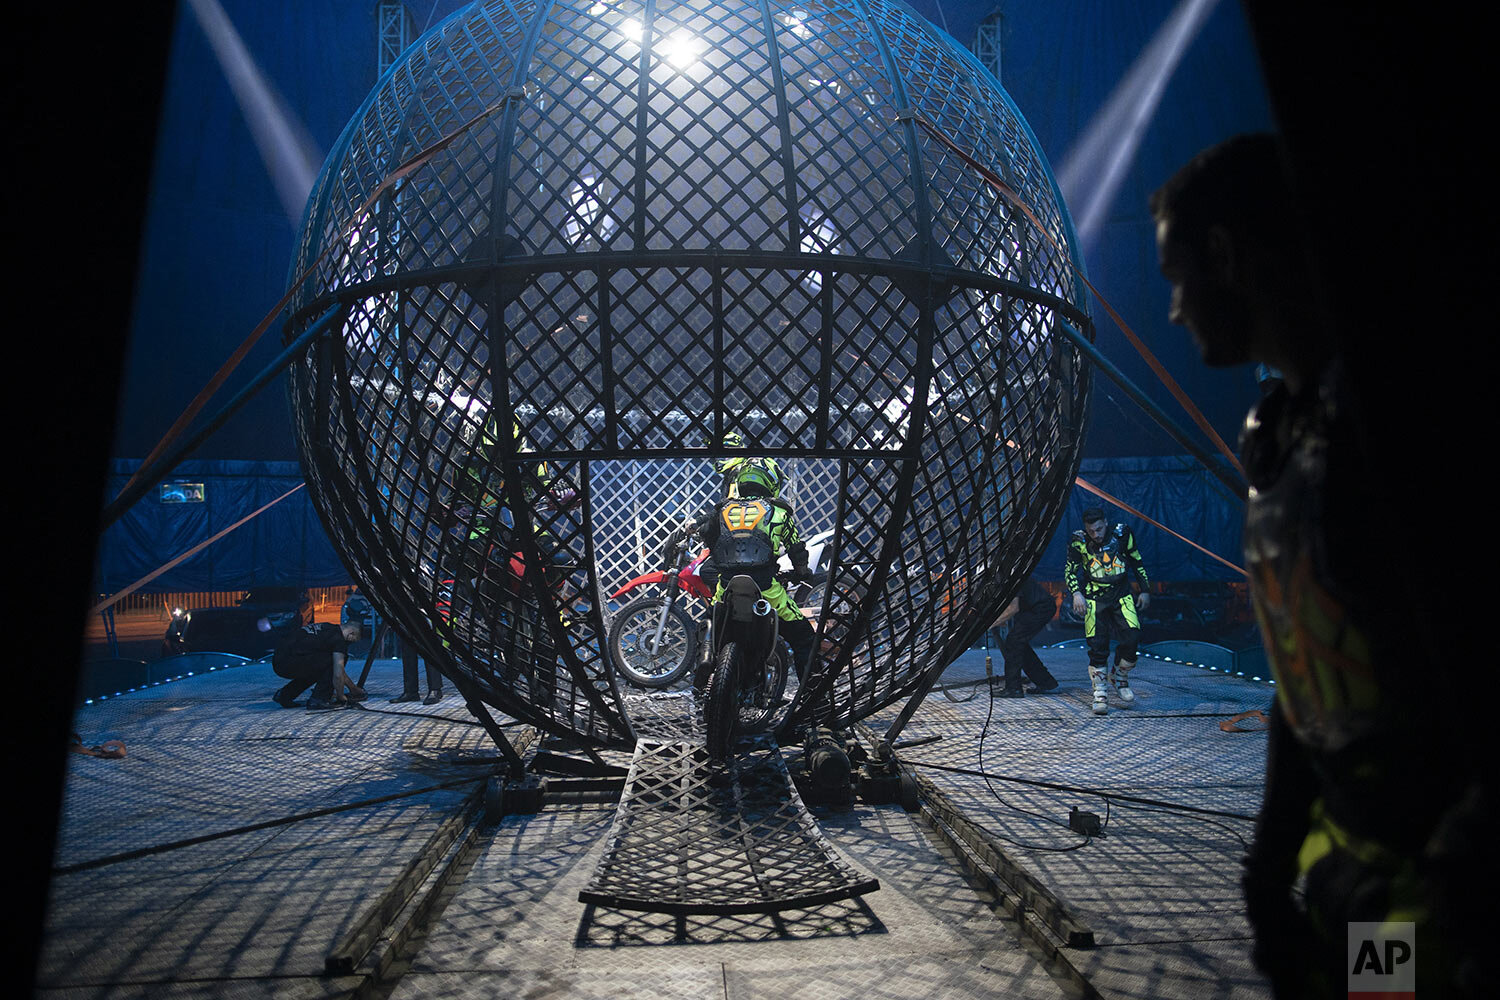  Artists on motorcyclists enter the Globe of Death at the Estoril Circus drive-in show in Itaguai, in greater Rio de Janeiro, Brazil, July 18, 2020. (AP Photo/Leo Correa) 